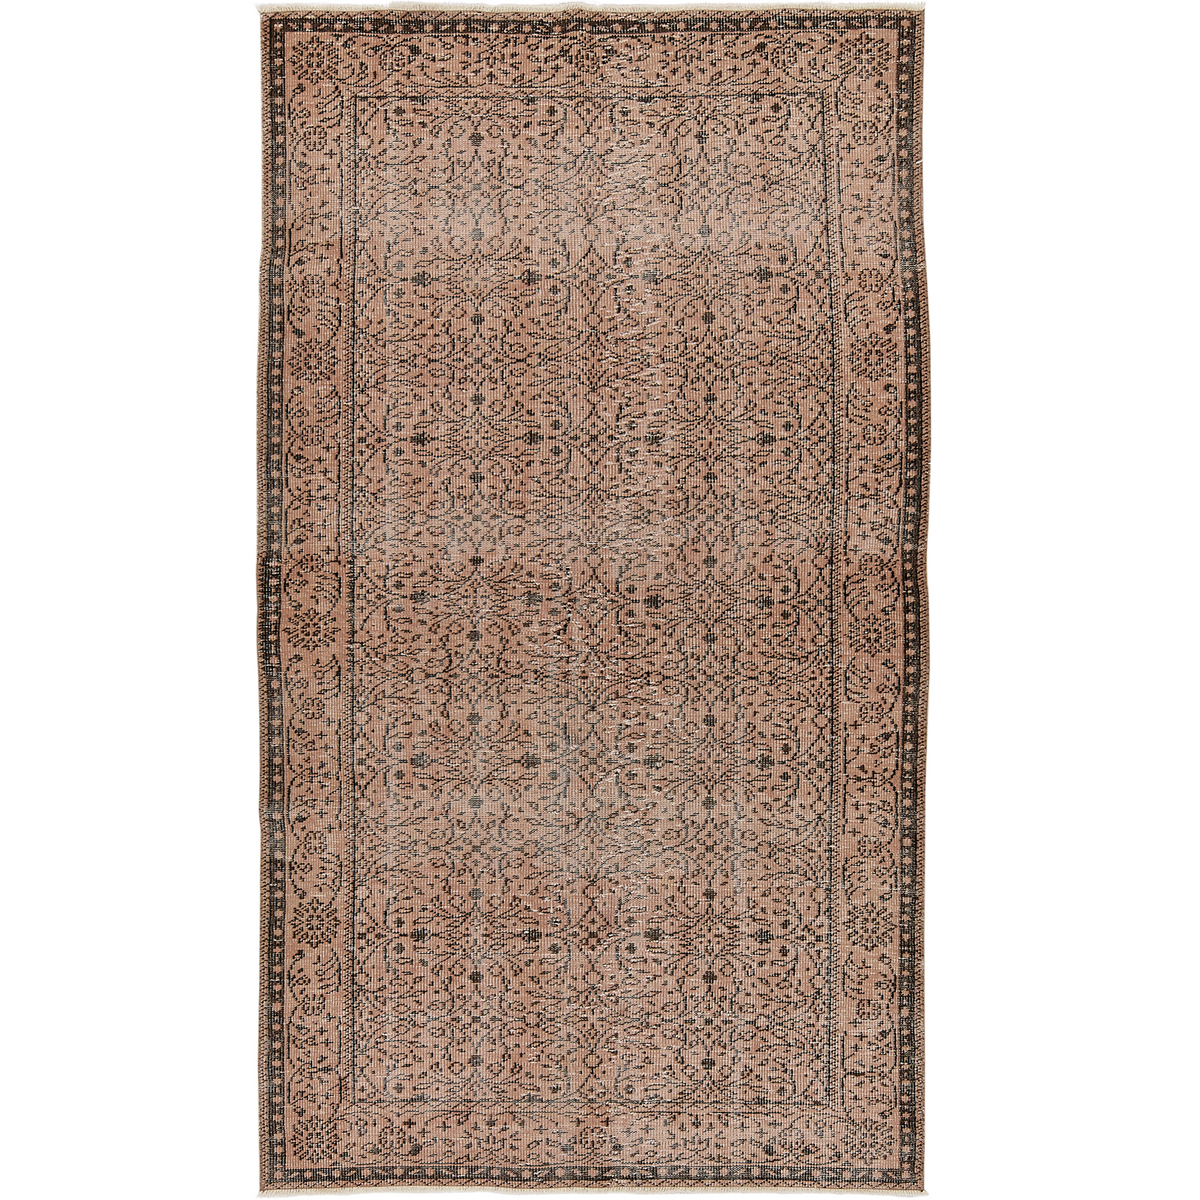 Firne | Rich Brown Overdyed Wool Rug | Kuden Rugs